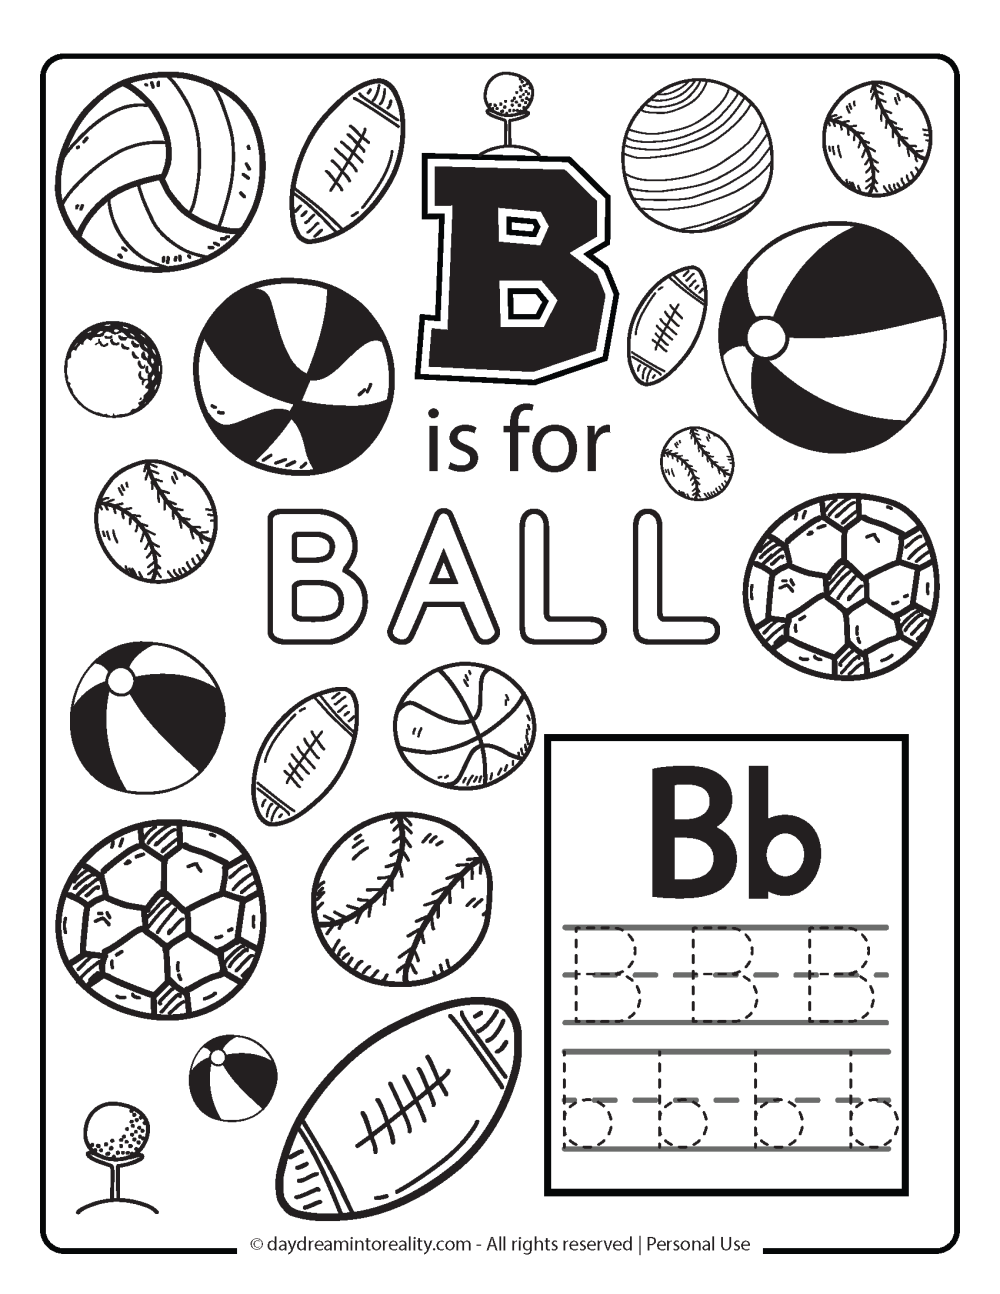 b is for ball coloring page free printable